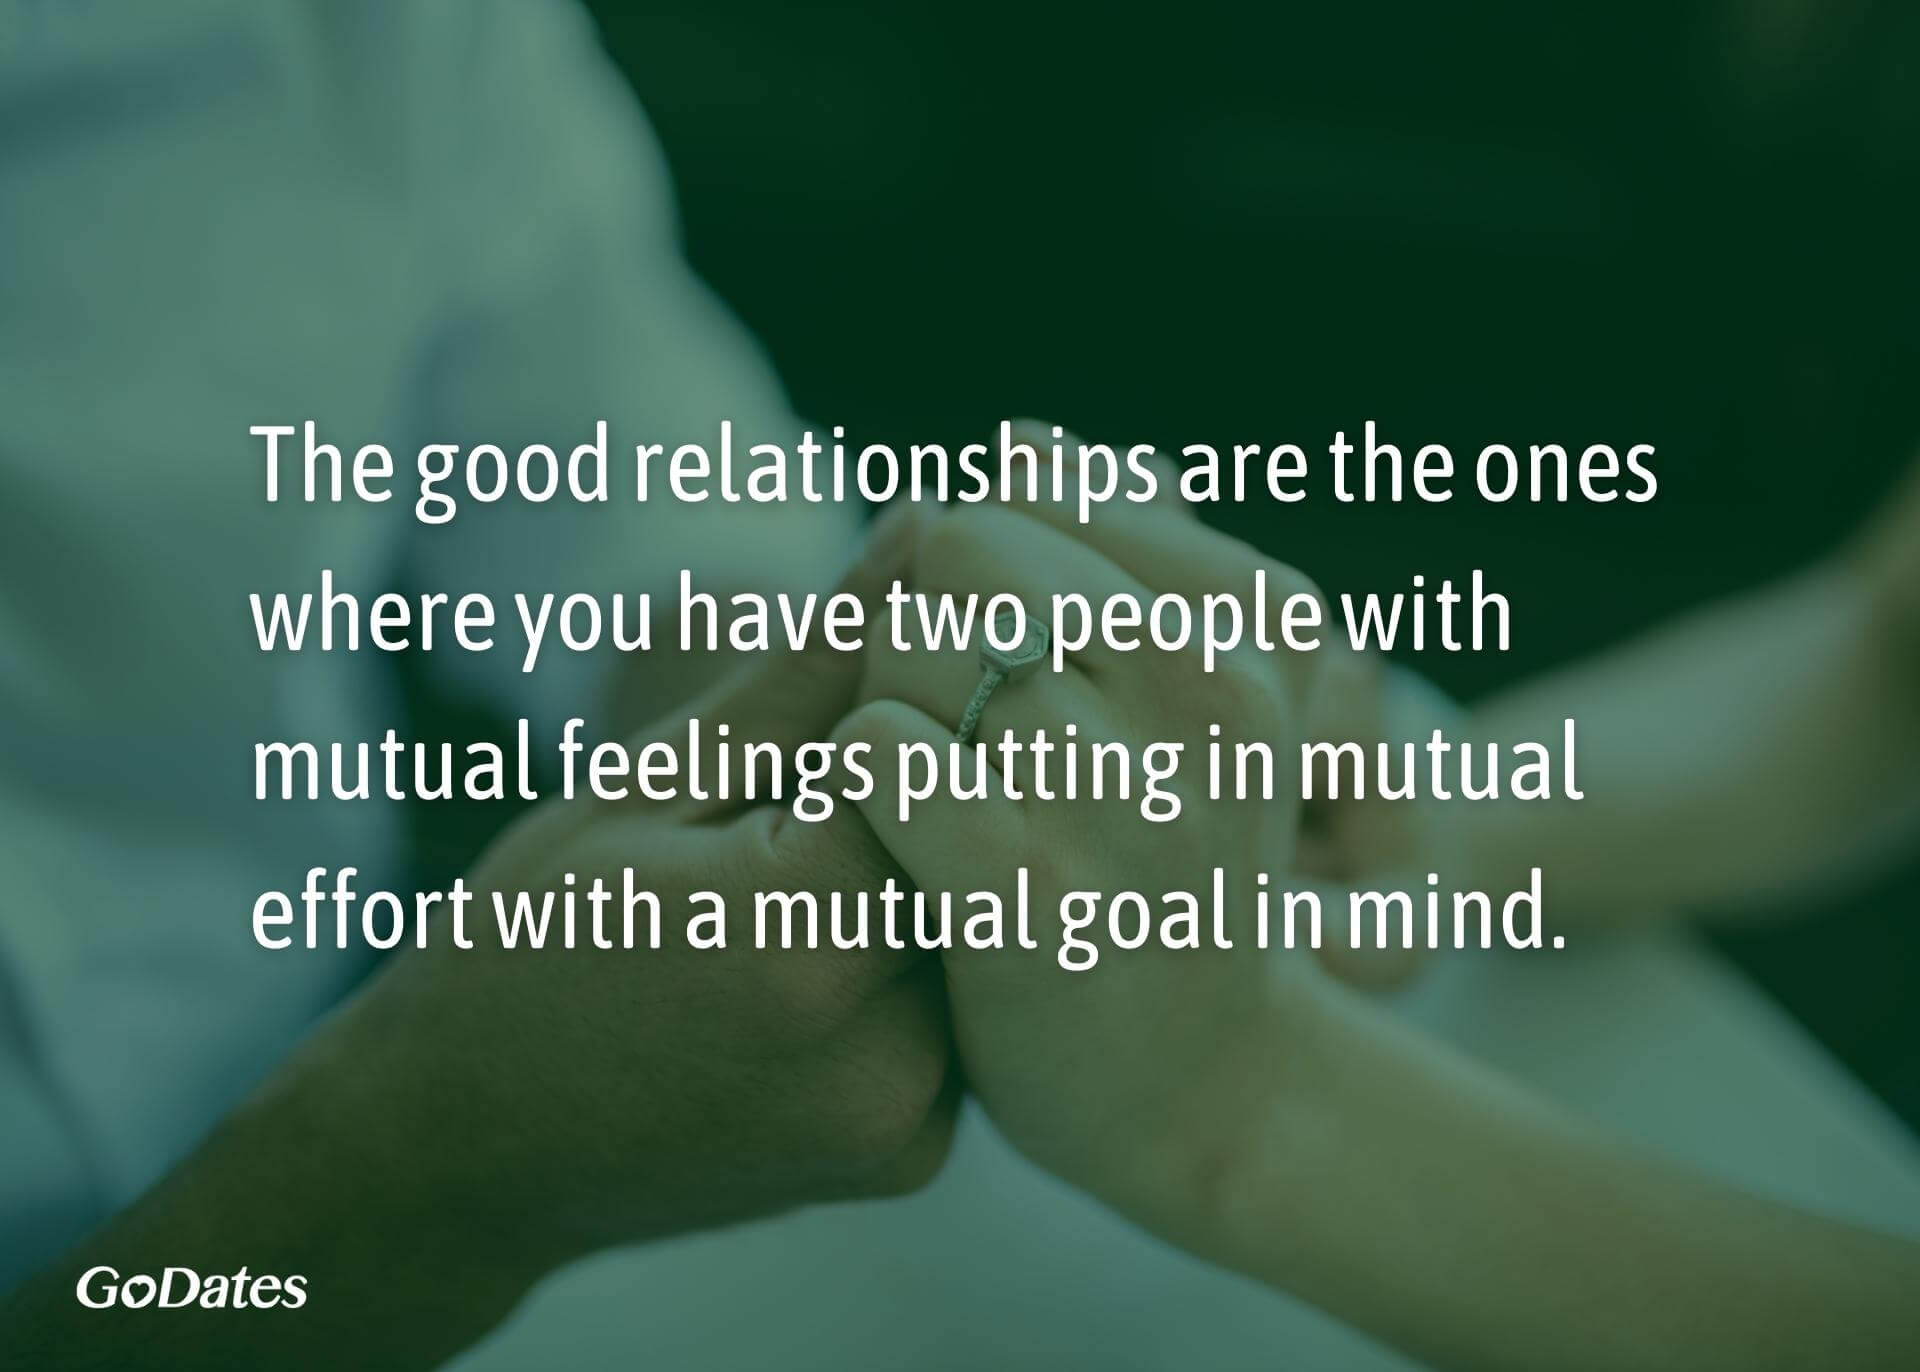 Good relationships are when you have two people putting in mutual effort quote